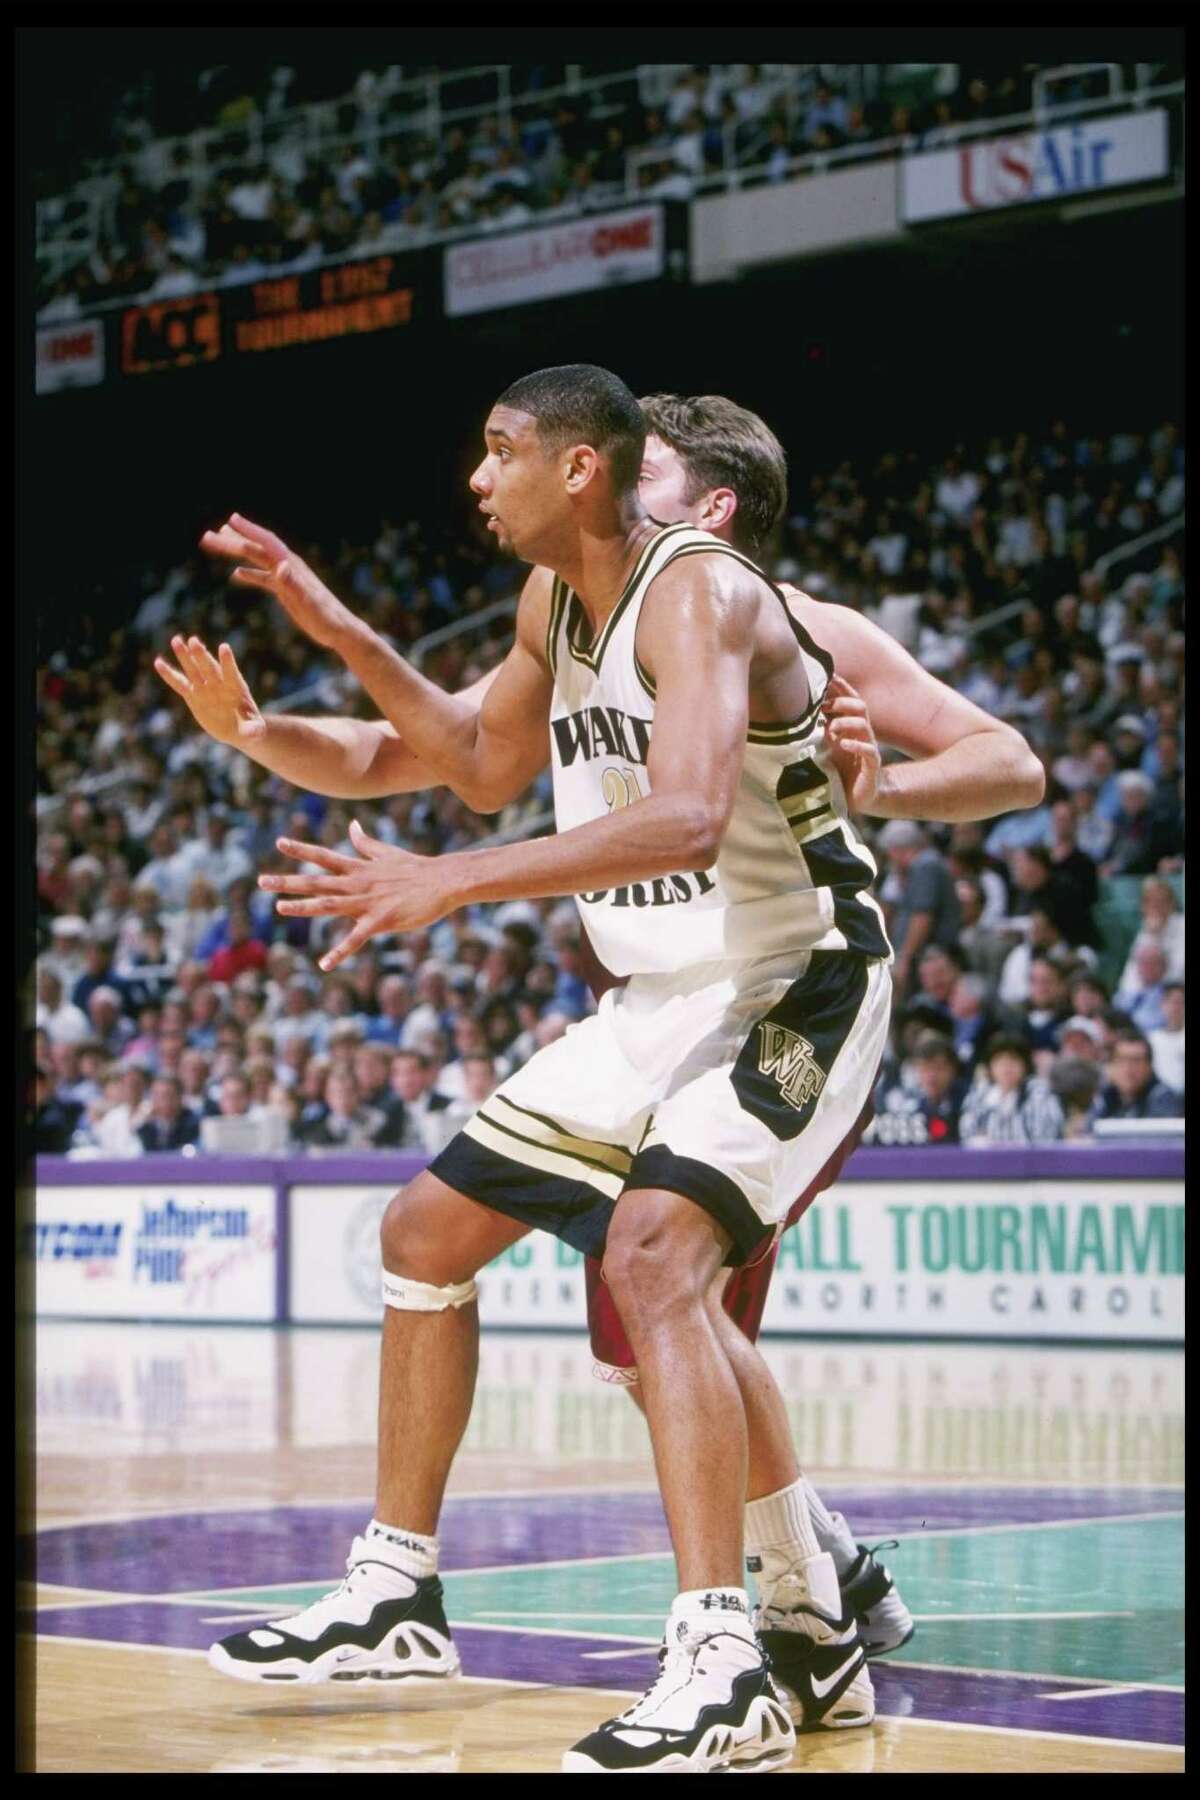 Looking back at Tim Duncan's career shoes